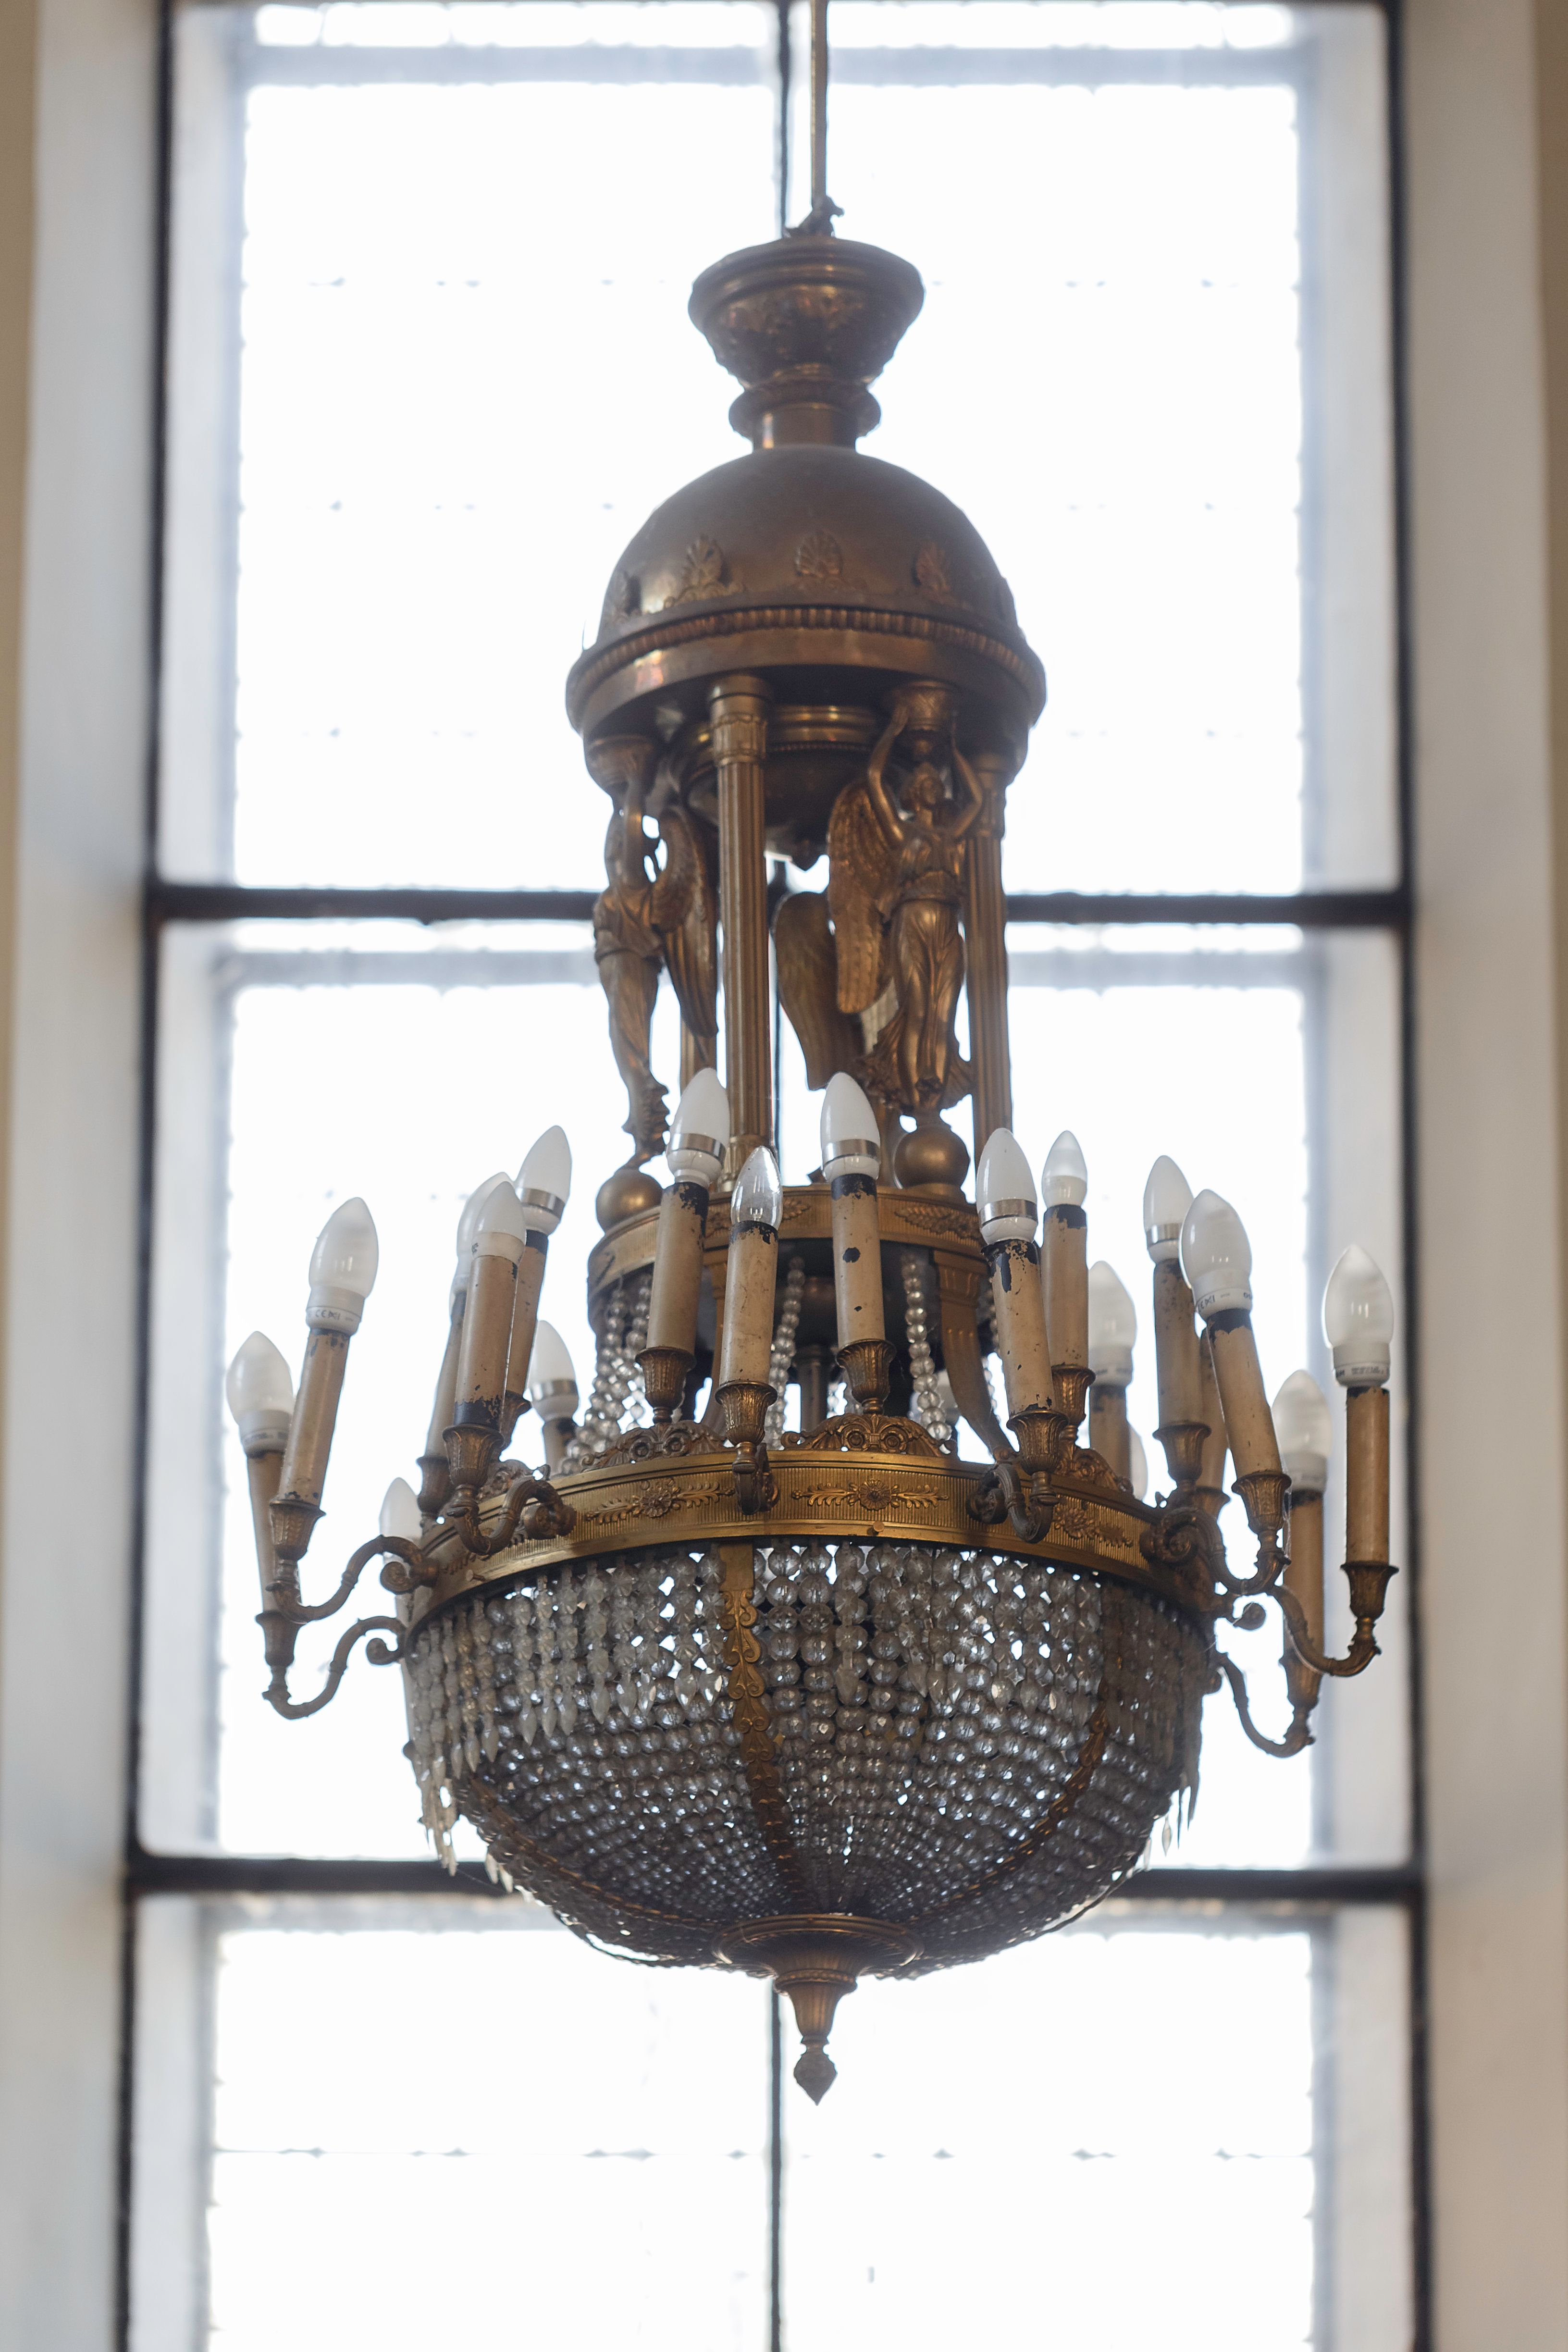 Chandelier, 1925, the church of the Assumption of the Blessed Virgin Mary (Vytautas the Great) in Kaunas. Photo by Povilas Jarmala, 2019